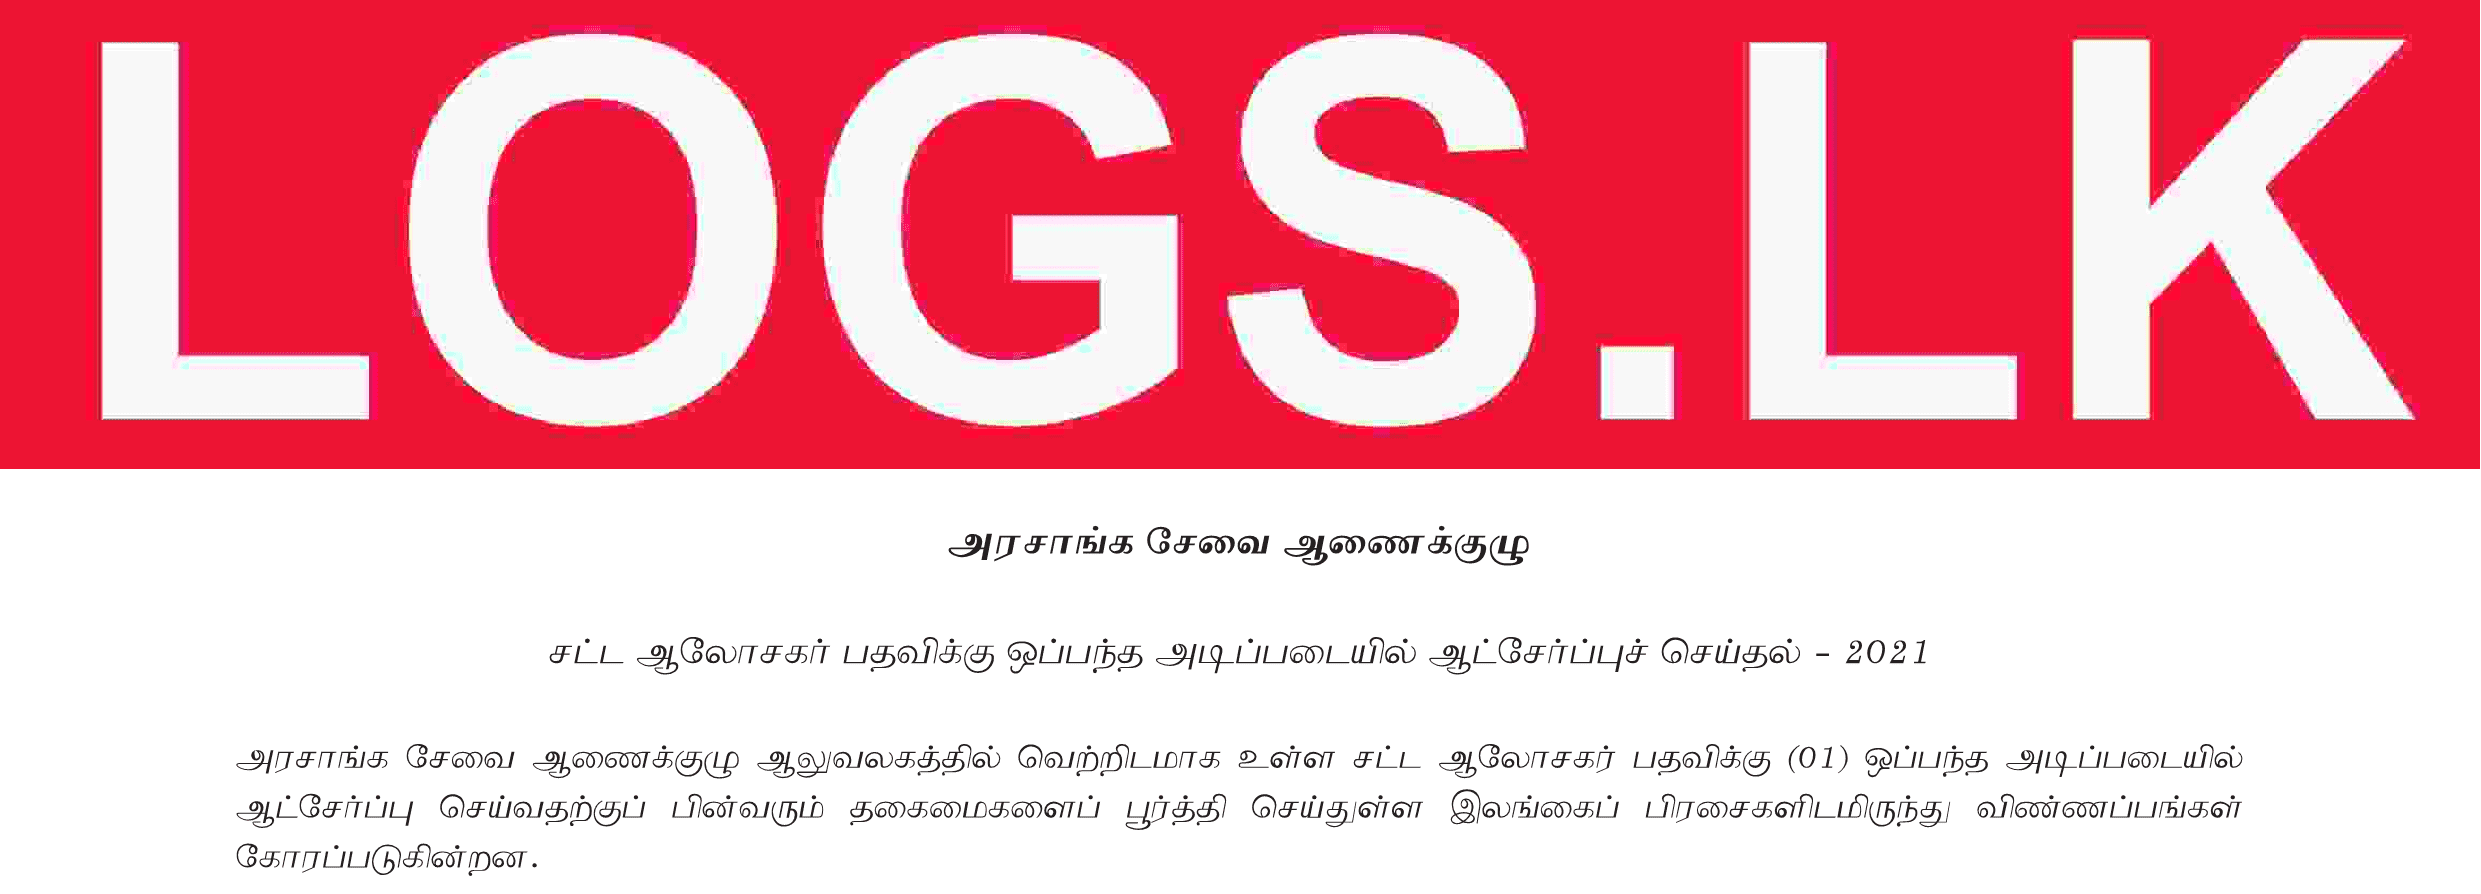 Recruitment on Open Basis for The Post of Legal Officer (Grade III of the Executive Service Category) - 2021 Tamil Gazette